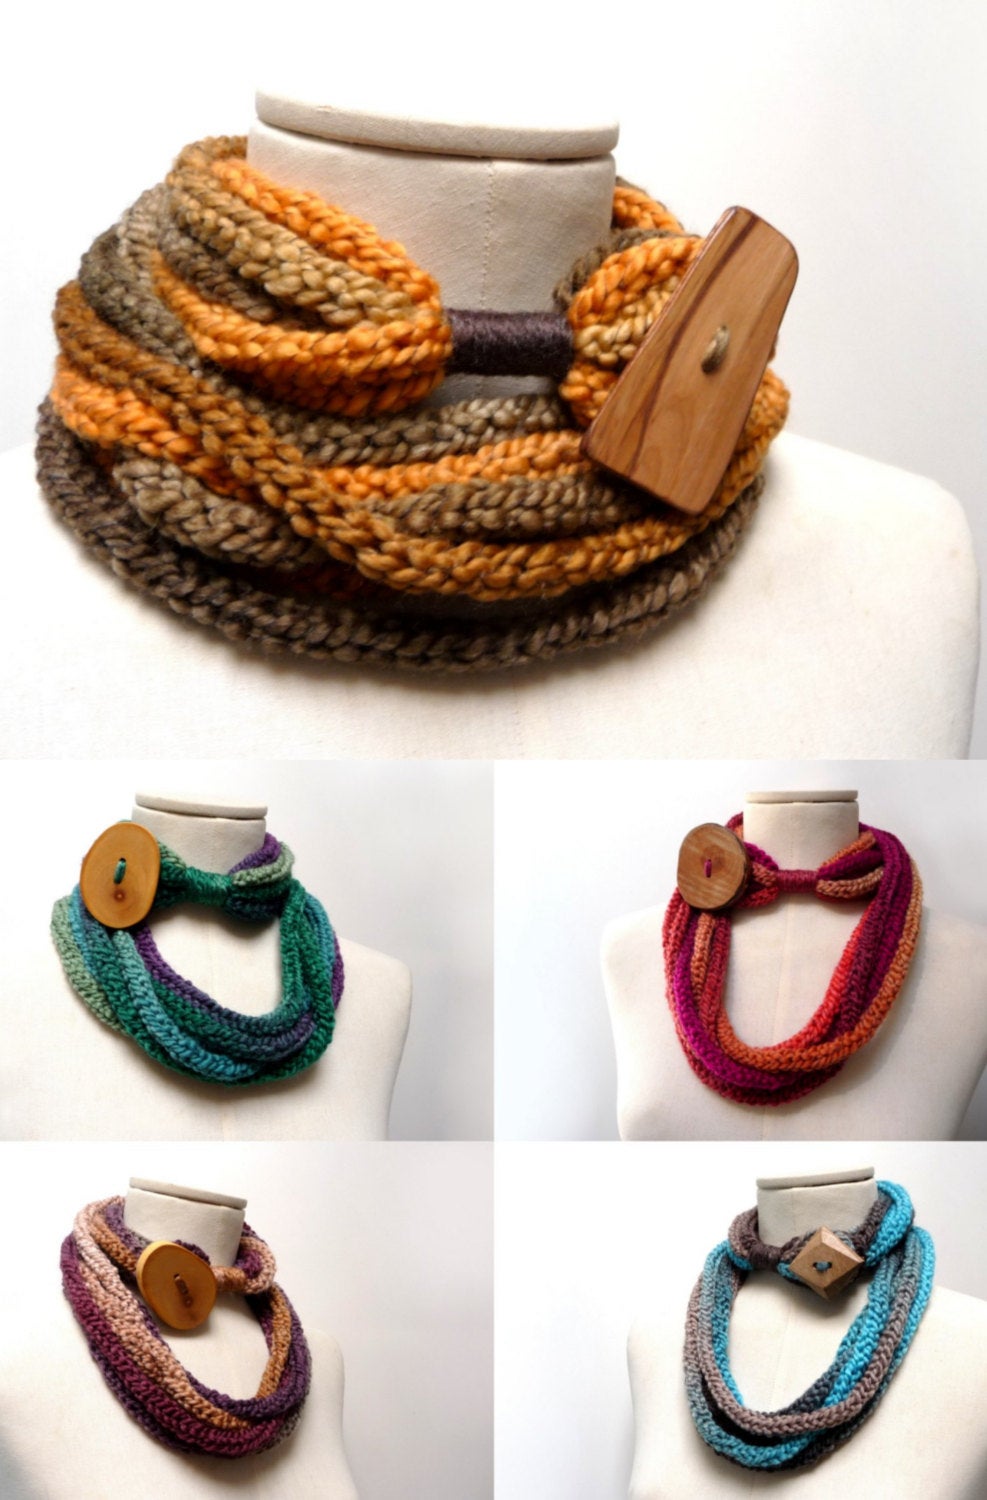 Loop Infinity Scarf Necklace, Knitted Scarlette Neckwarmer - Ombre Yarn With Giant Wood Button - Custom Color